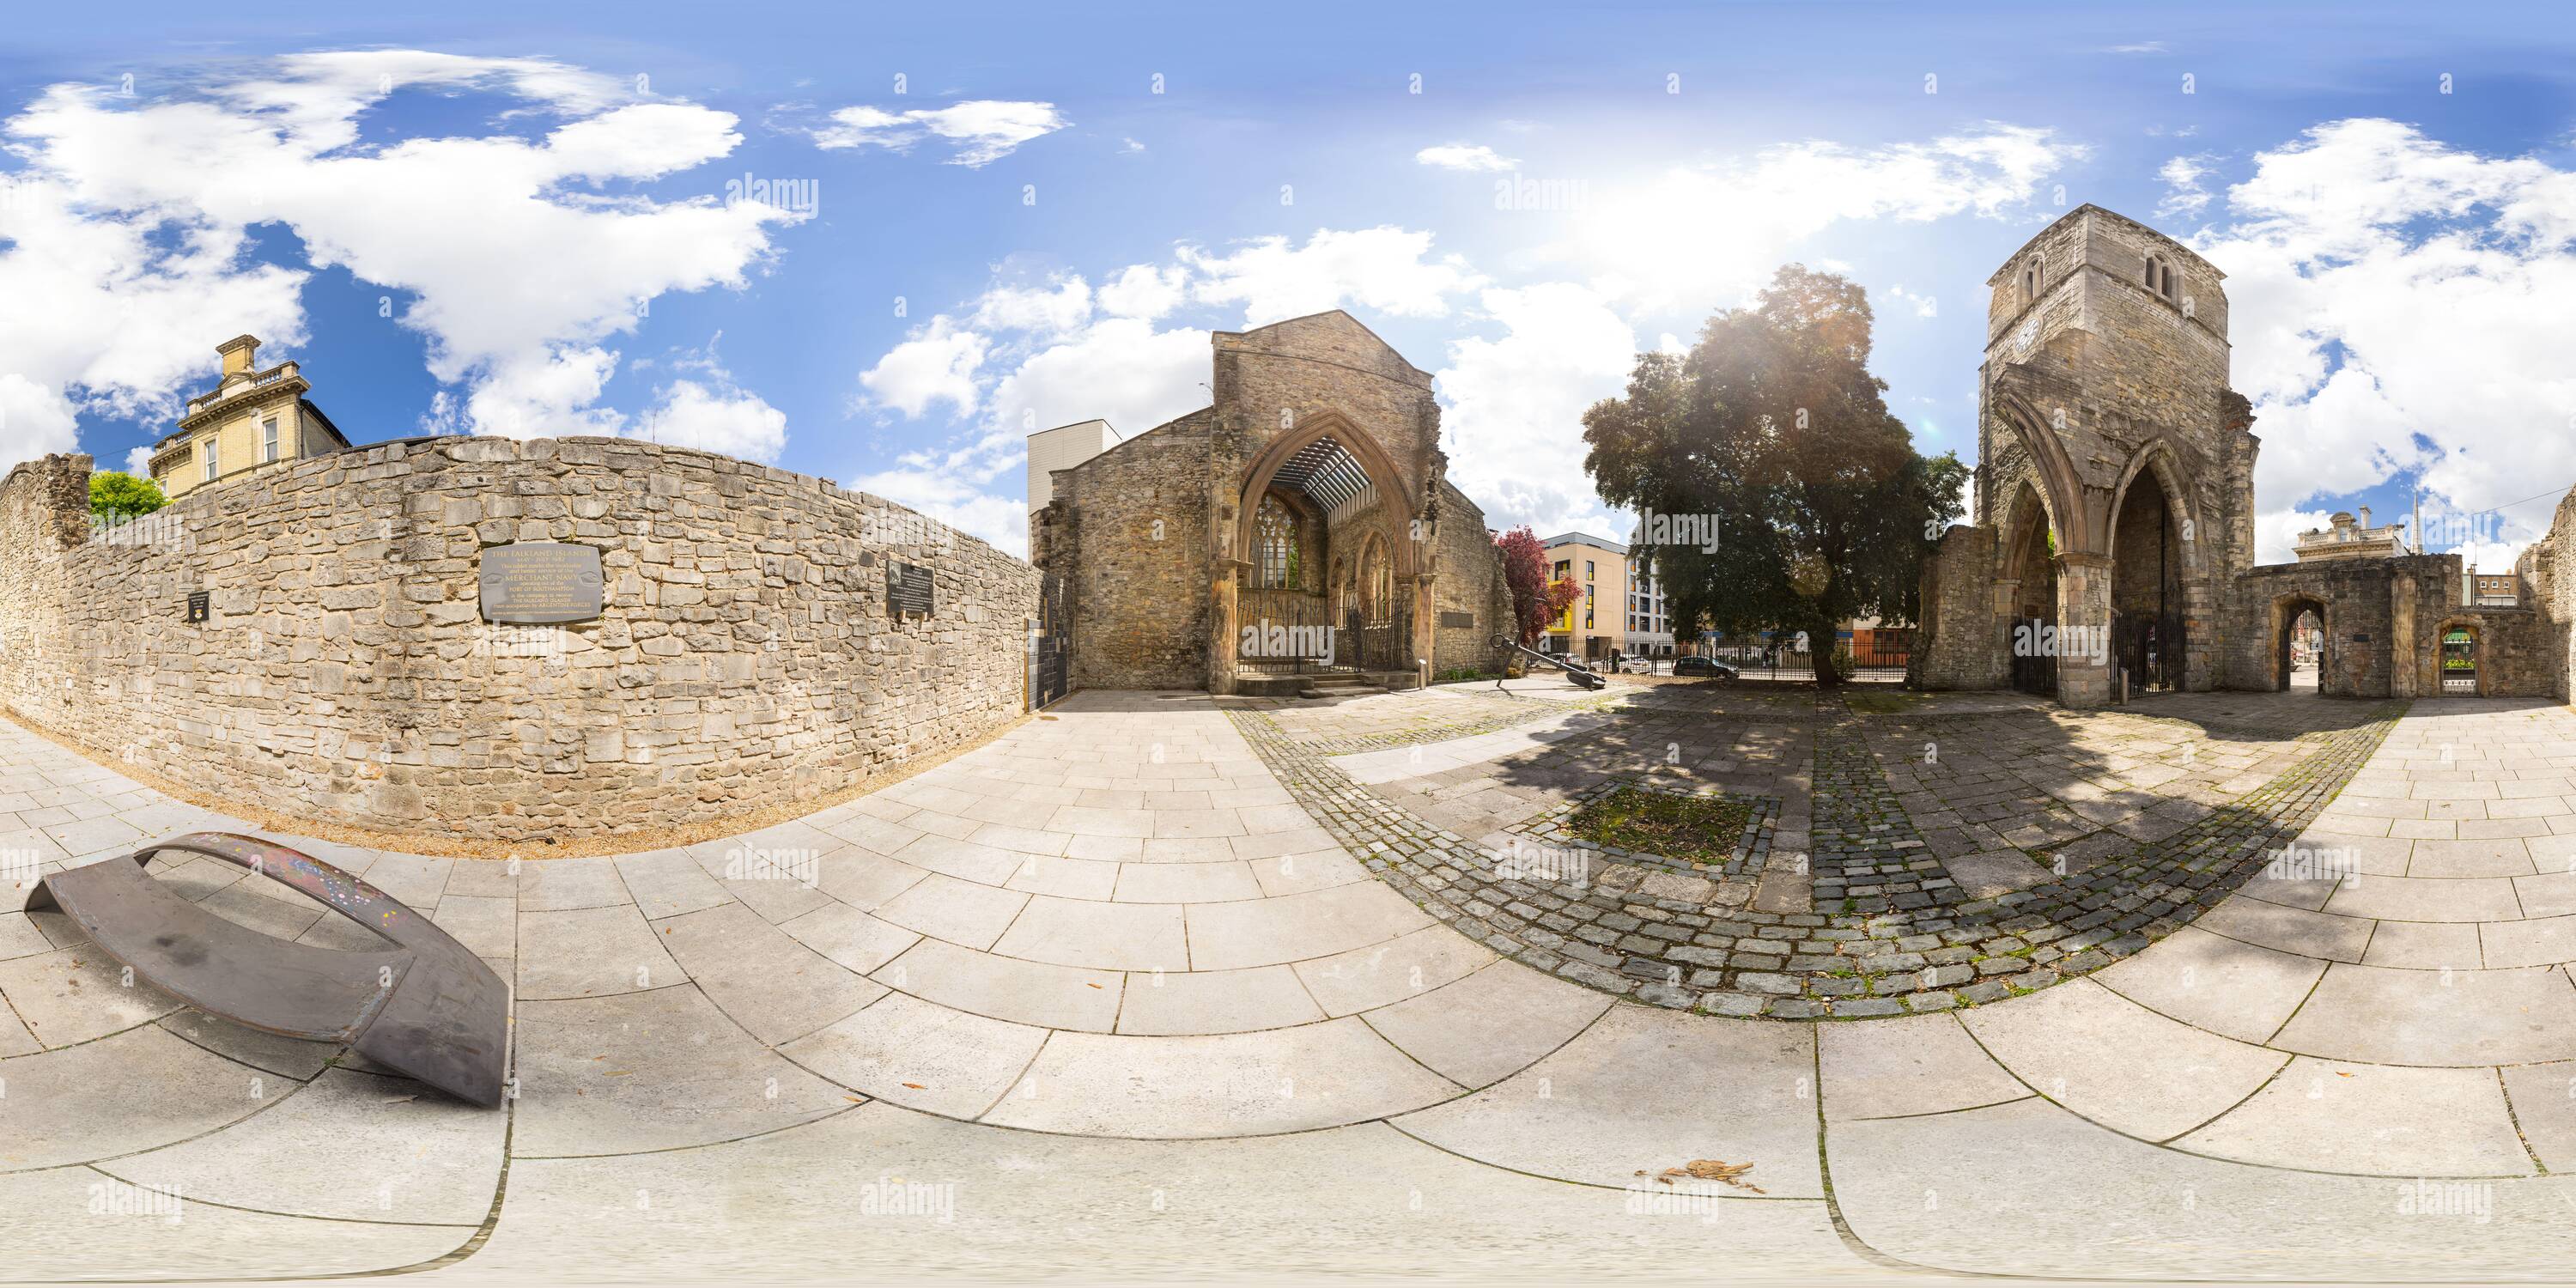 360 degree panoramic view of Holy Rood church in Southampton was destroyed in an air raid in 1940 and is now a memorial to Merchant Navy seafarers.